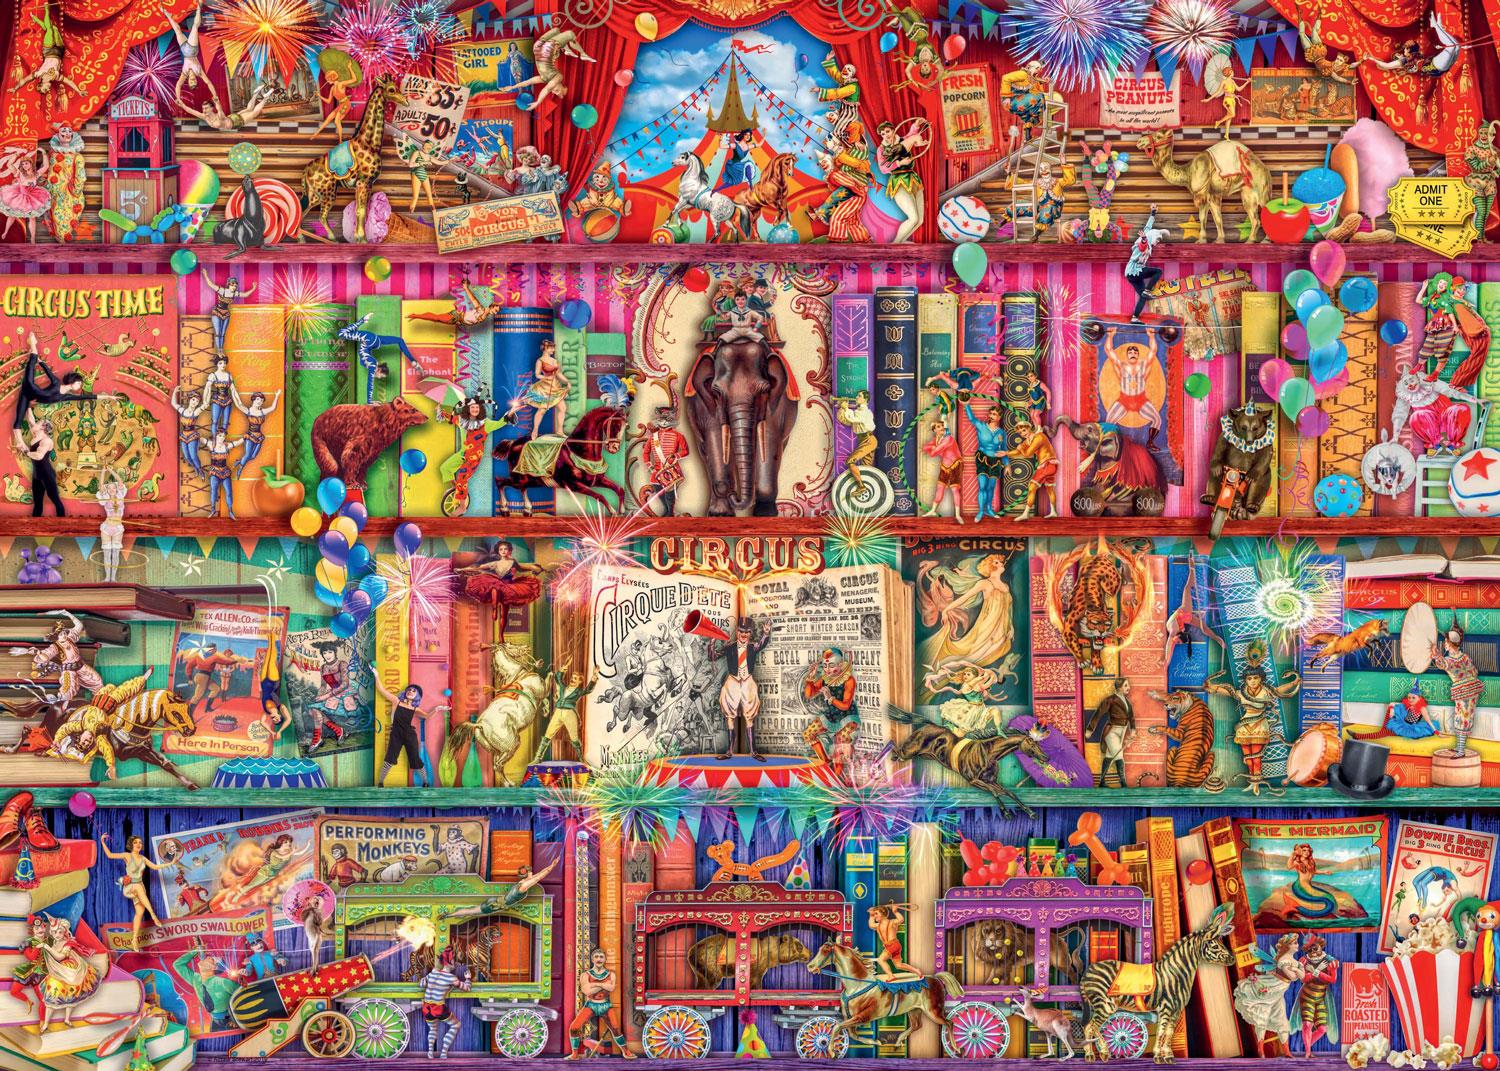 Ravensburger The Greatest Show on Earth Jigsaw Puzzle (1000 Pieces)